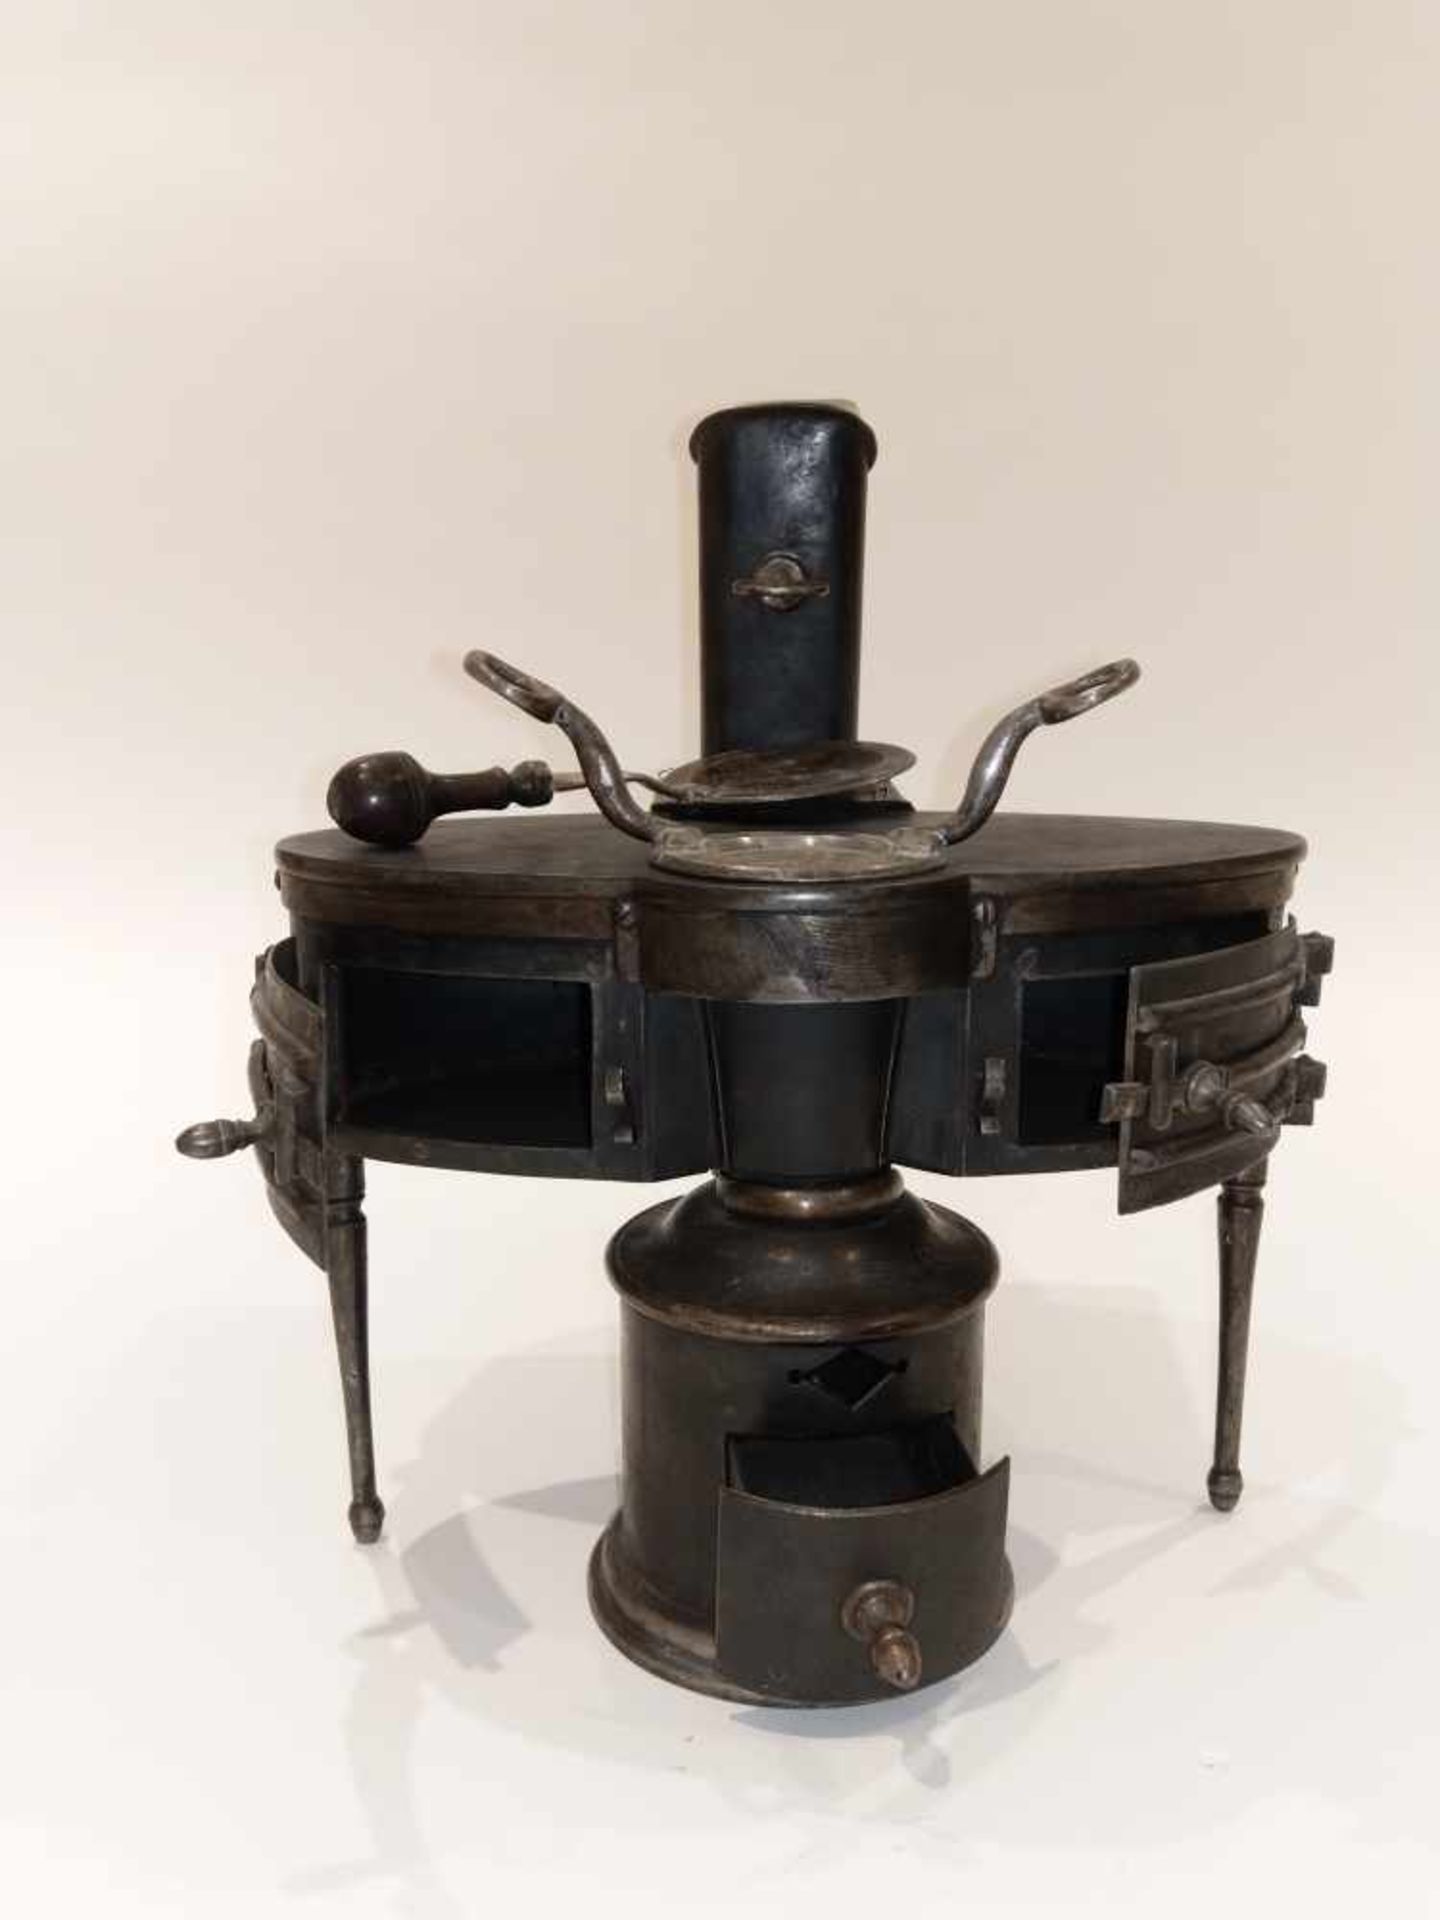 Small kitchen stove Cast iron with an ashtray and heating plates, original chimney 28 x 33 x 32.